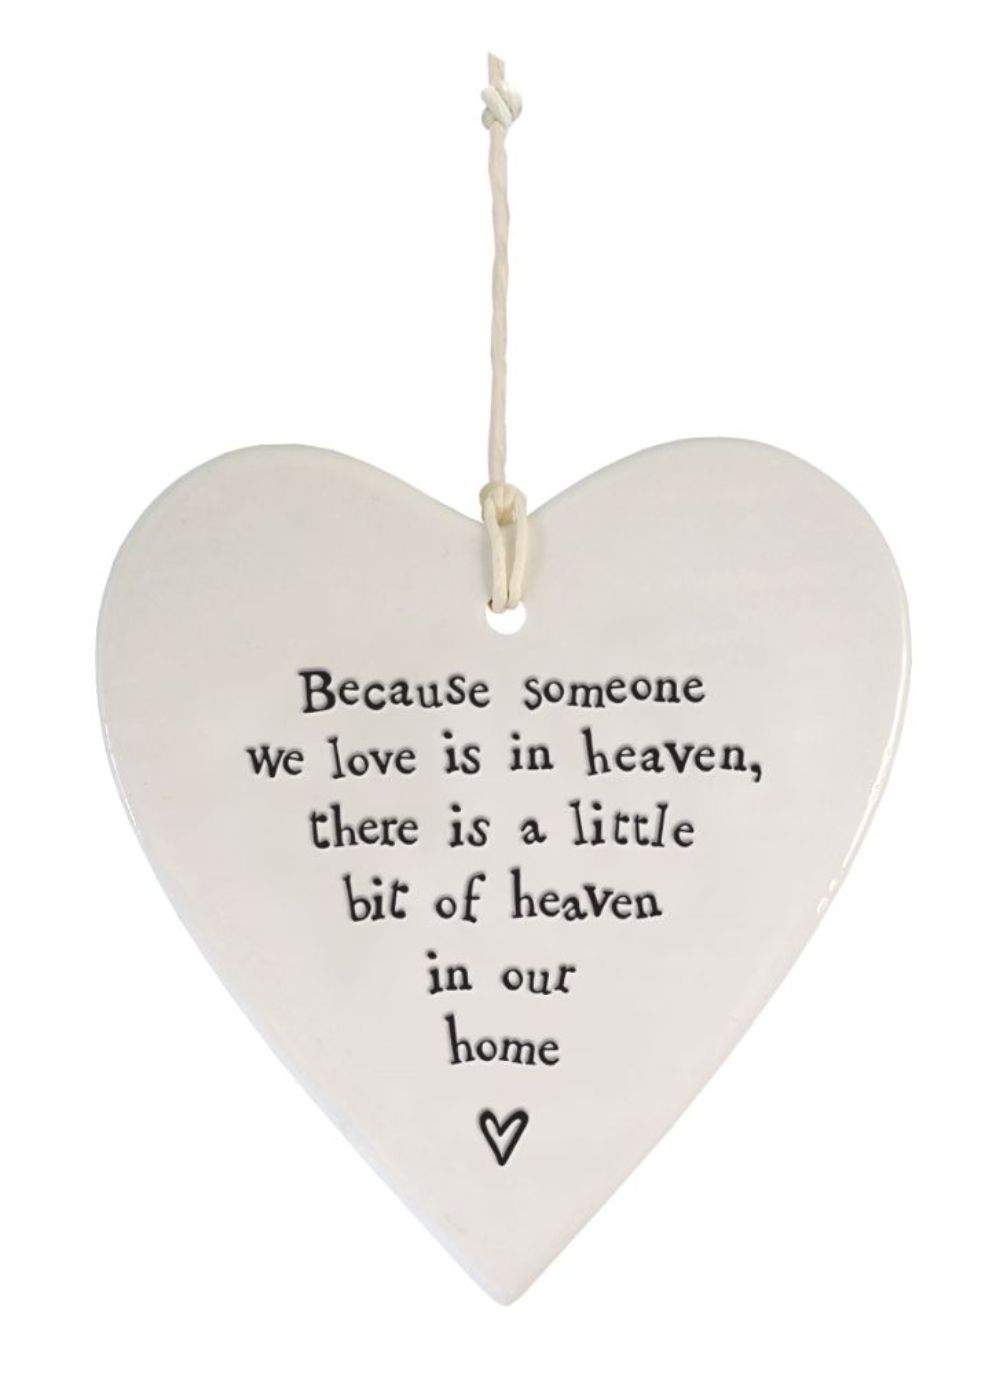 East Of India Bit Of Heaven In Our Home Heart Shaped Ceramic Hanging Plaque